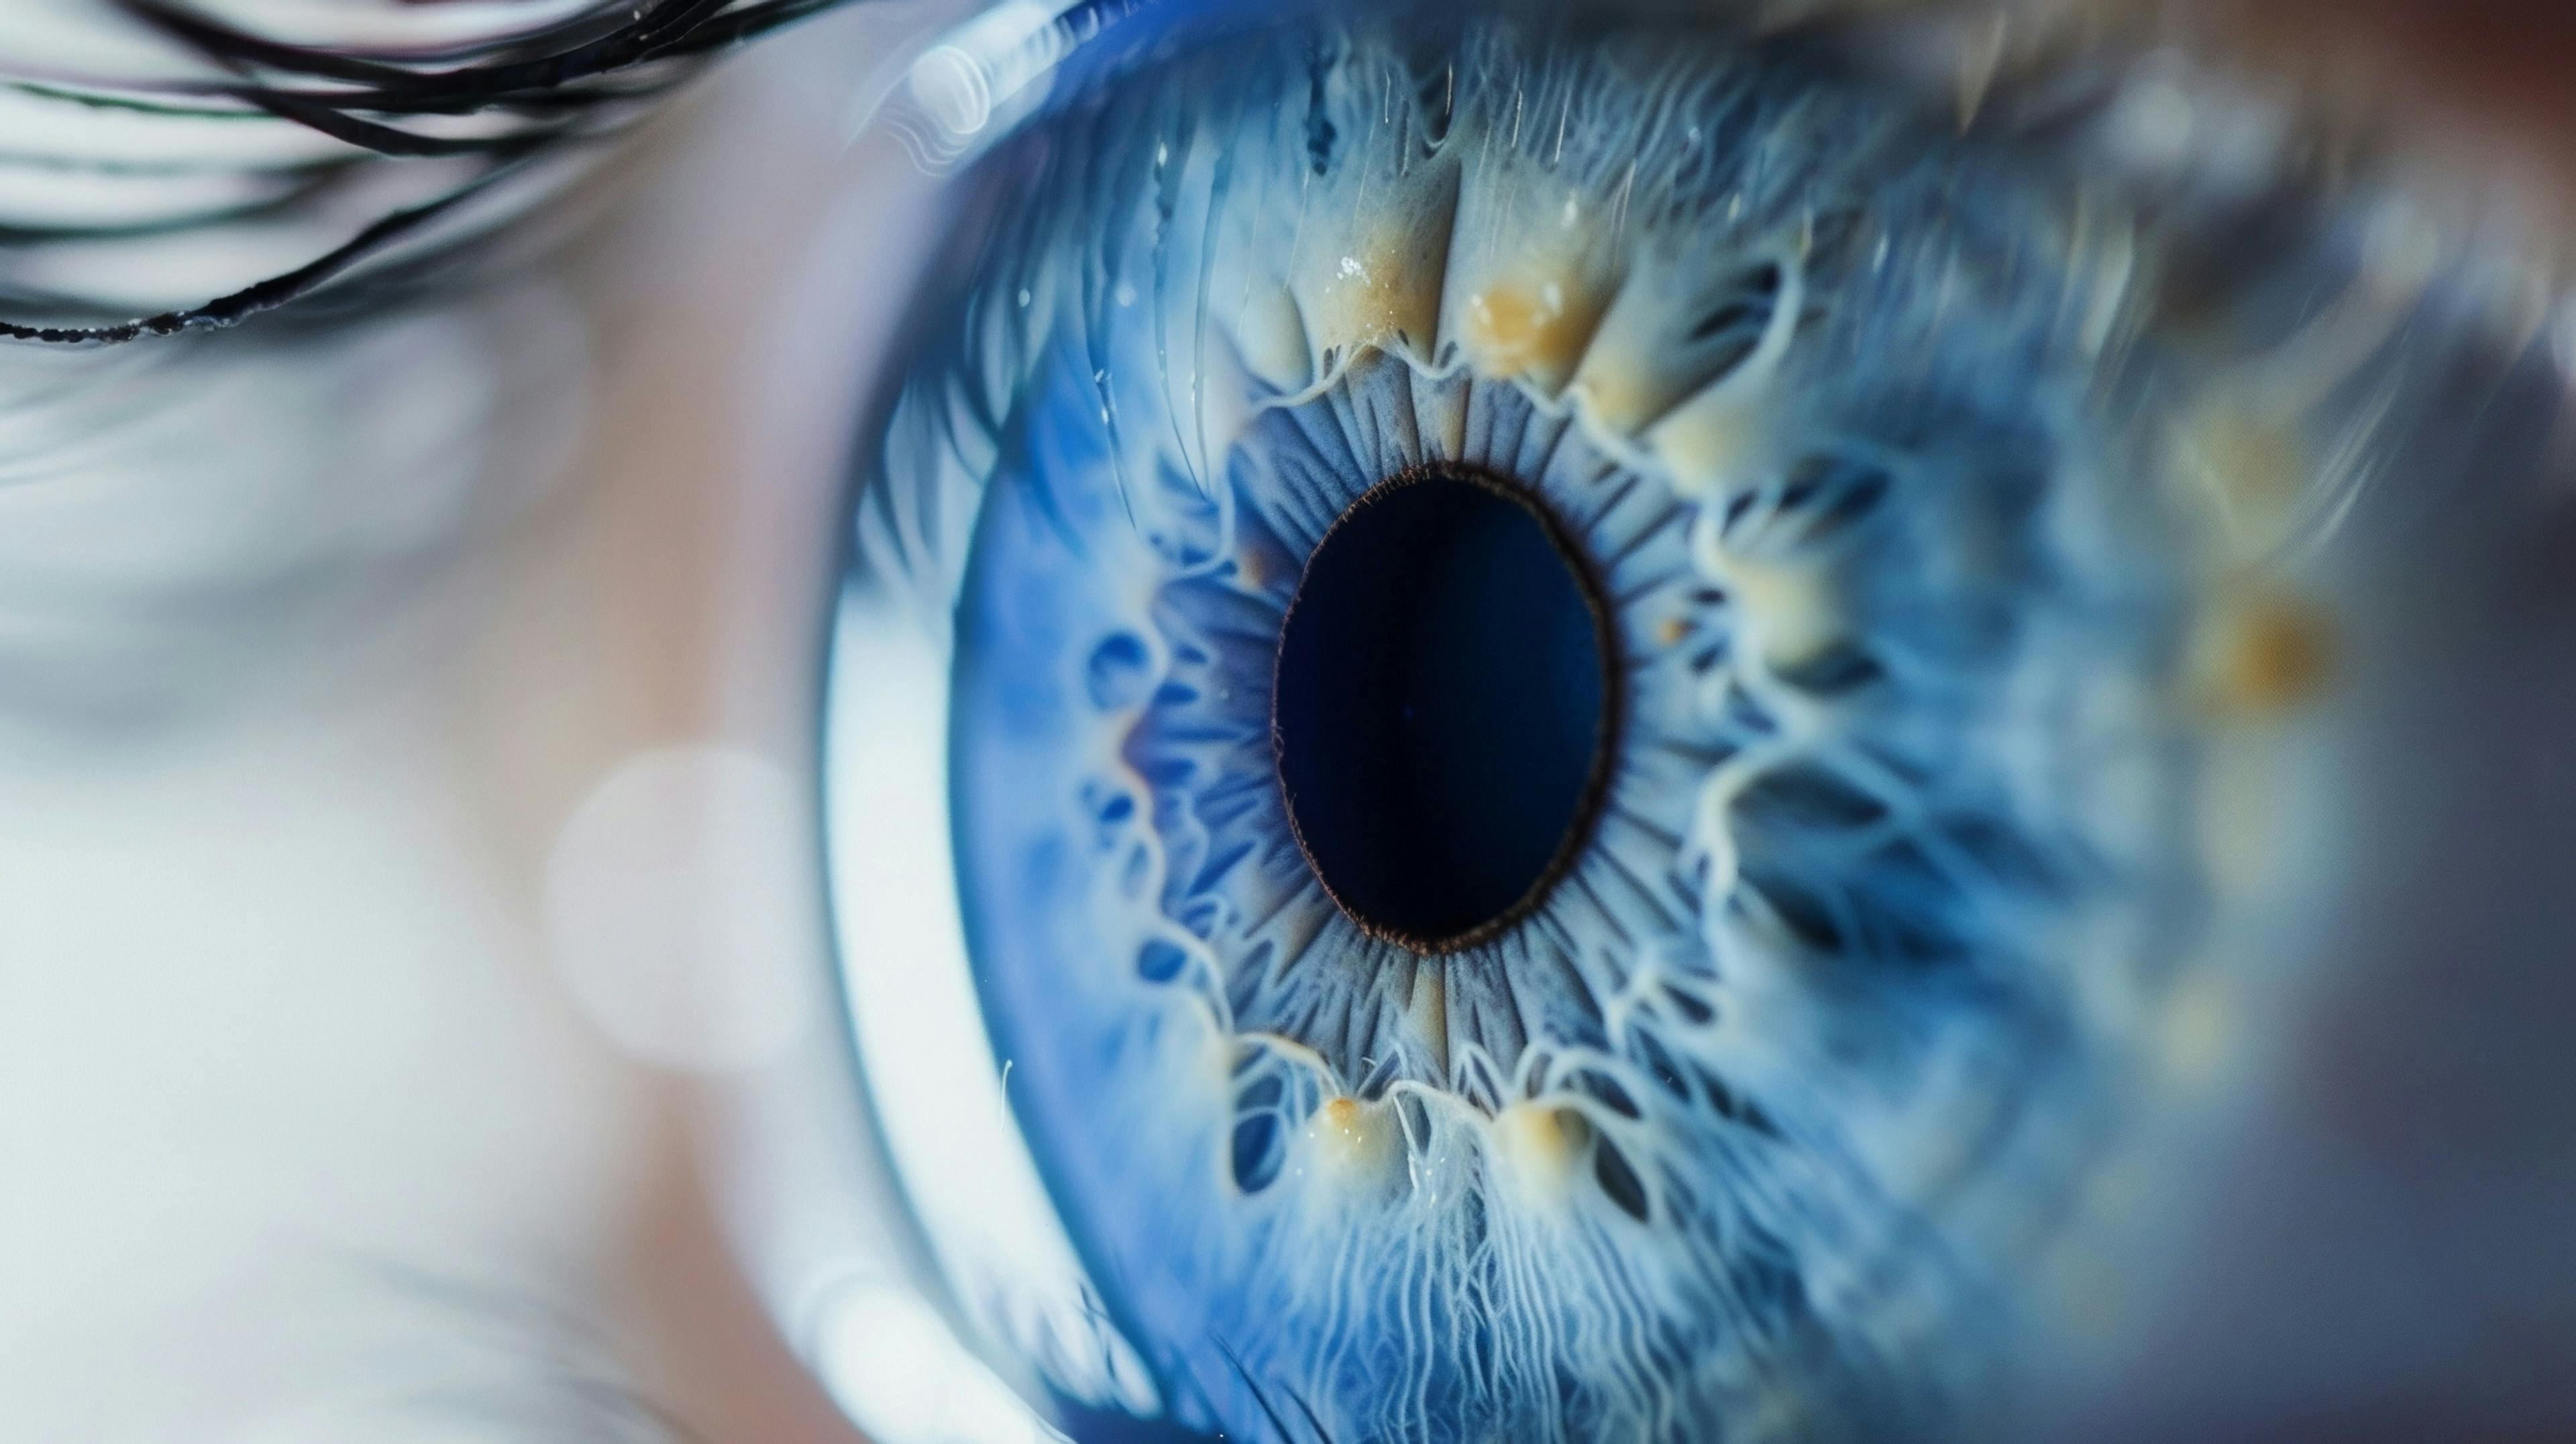 Pediatric patients with uveitis at elevated risk of cataracts, study finds | Image Credit: © Justlight - © Justlight - stock.adobe.com.